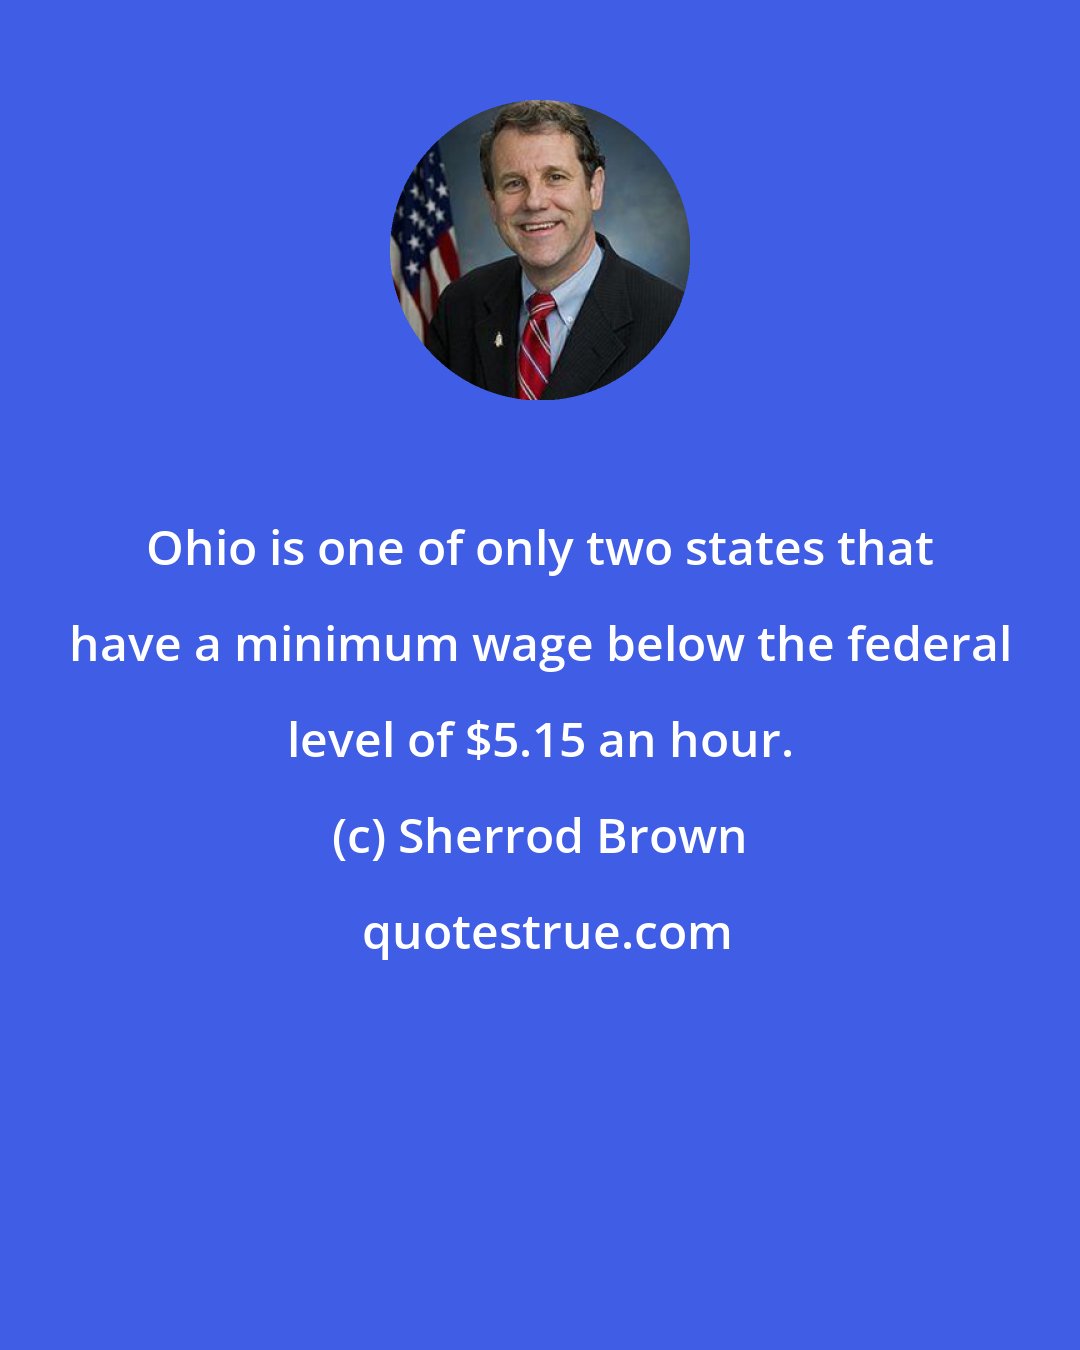 Sherrod Brown: Ohio is one of only two states that have a minimum wage below the federal level of $5.15 an hour.